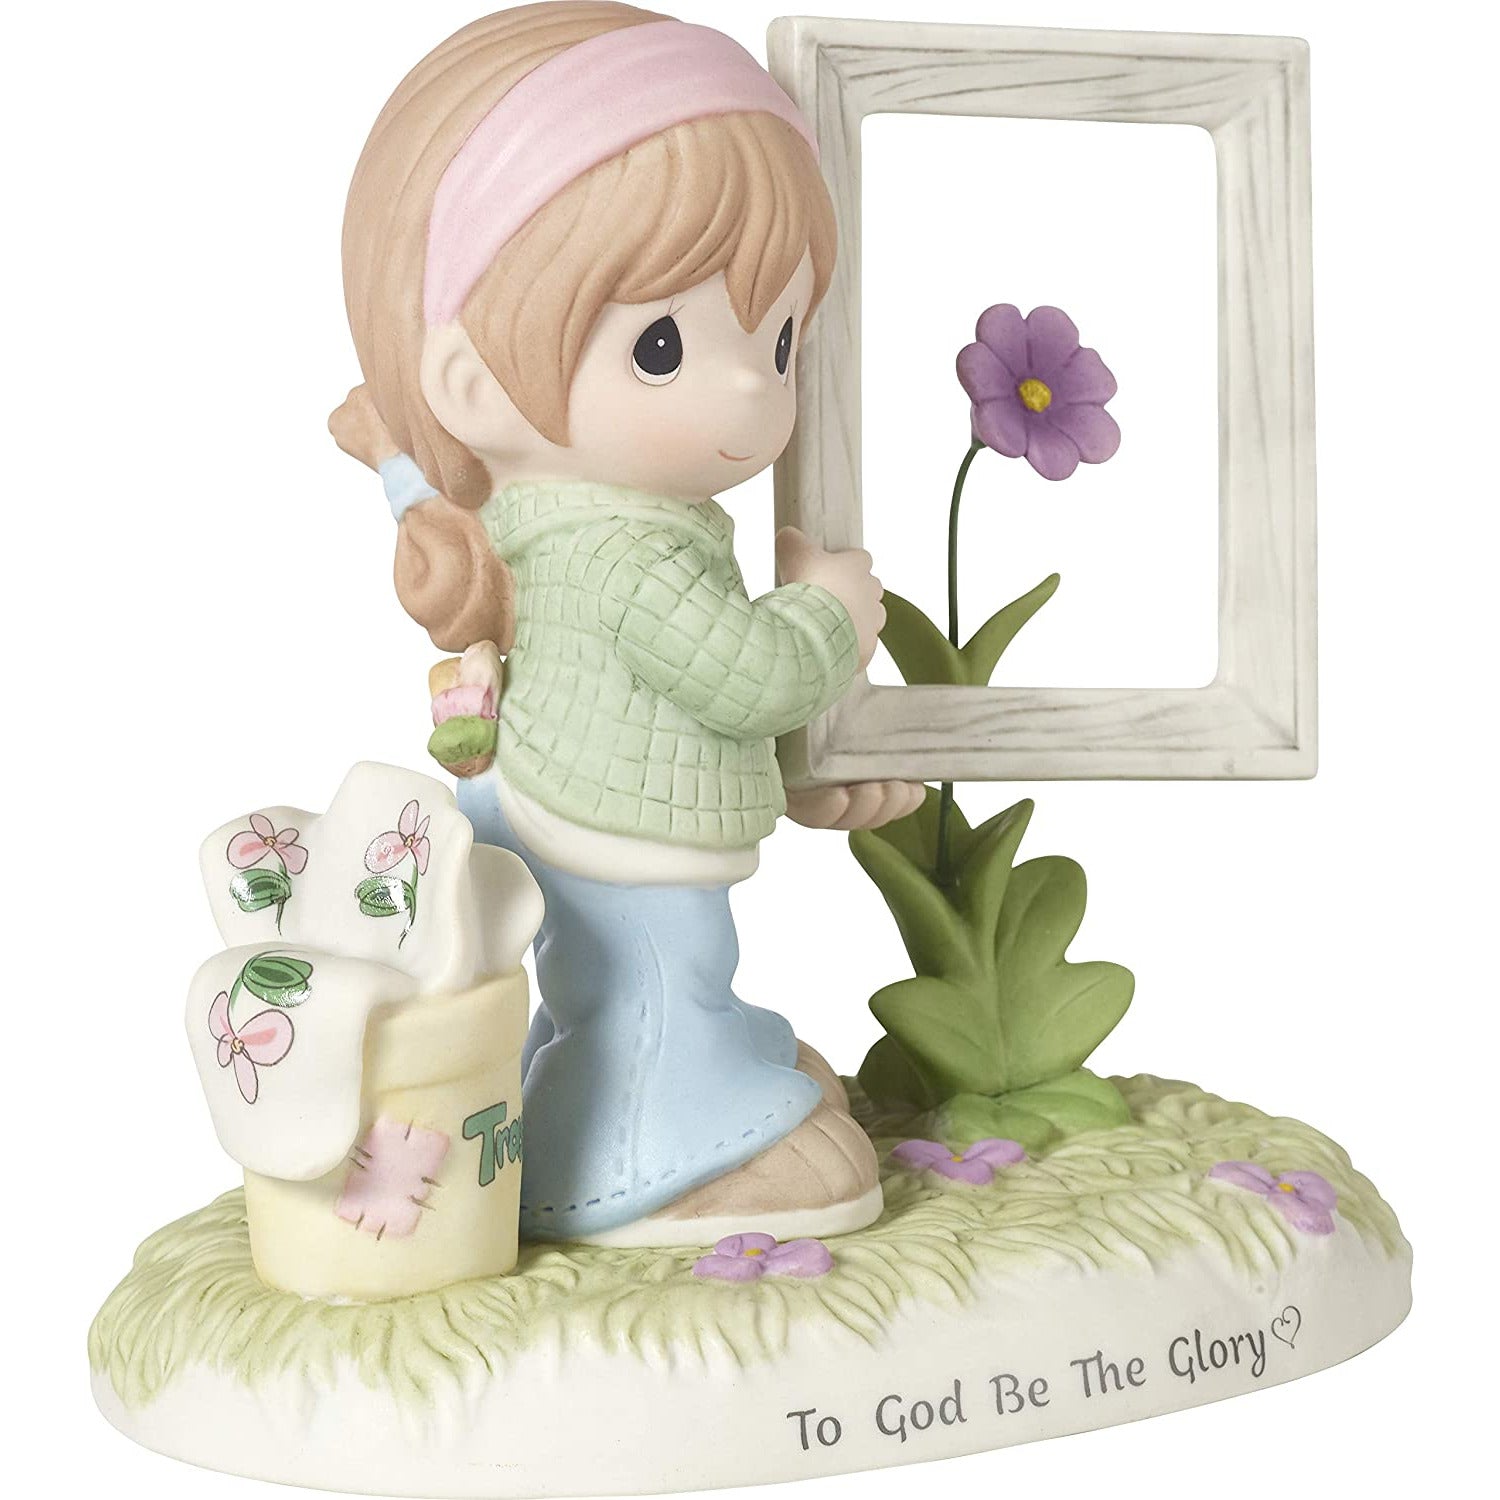 Precious Moments Girl Holding Frame Around Flower 182013 to God Be The Glory Bisque Porcelain Figurine, Multi